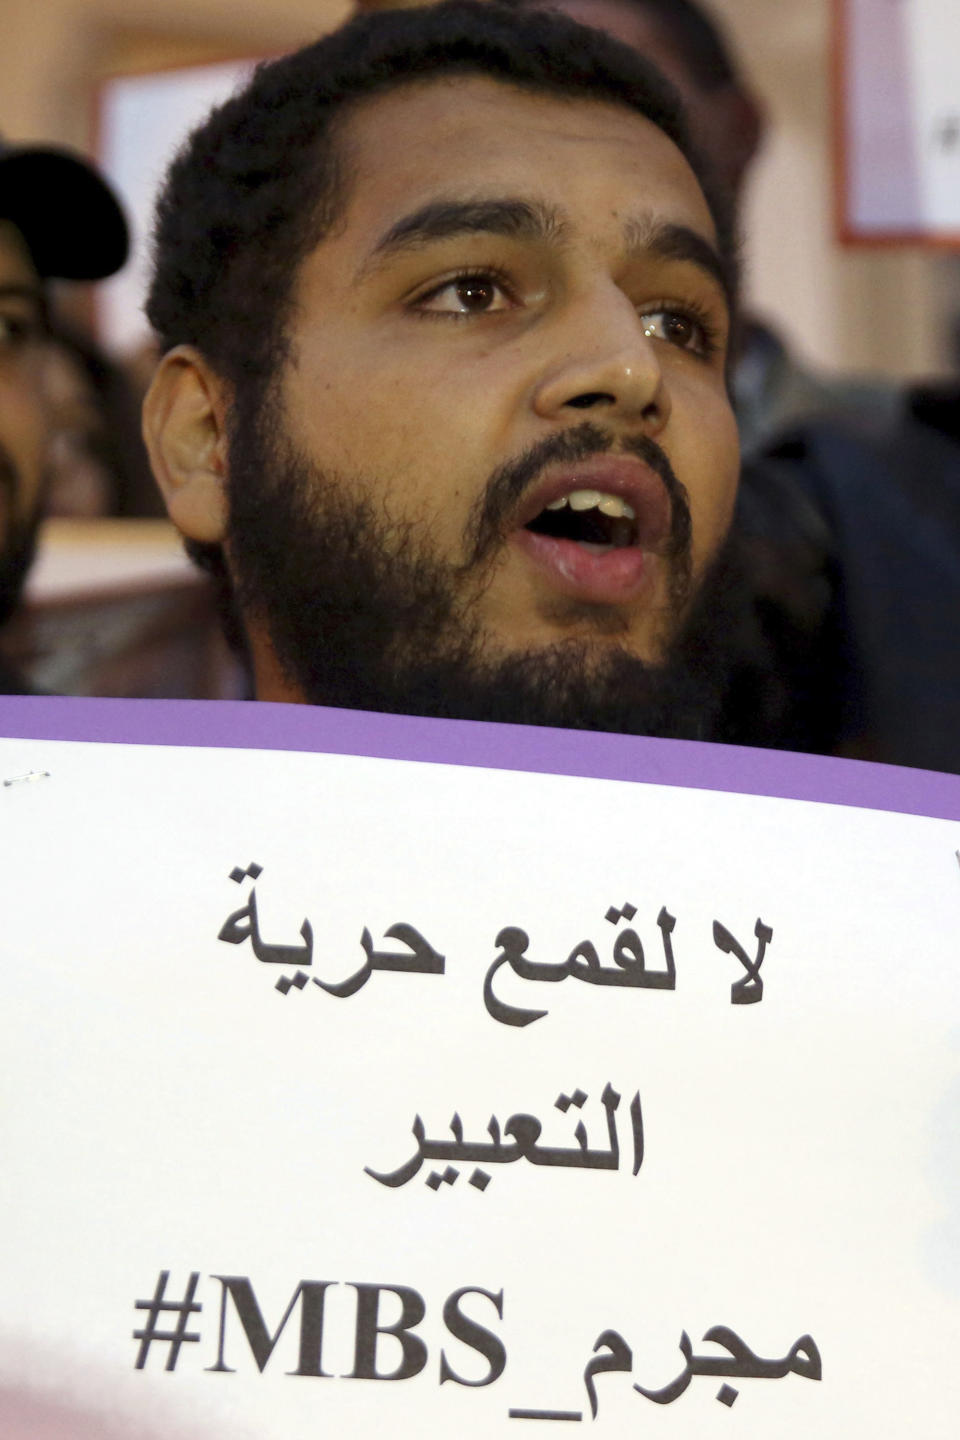 An activist holds up a placard that reads "No to repression of freedom of expression #MBS assassin" on the eve of Saudi Crown Prince Mohammed bin Salman's official visit to Tunisia, during a protest to denounce the killing of Saudi journalist Jamal Khashoggi, in downtown Tunis, Monday, Nov. 26, 2018. (AP Photo/Hassene Dridi)